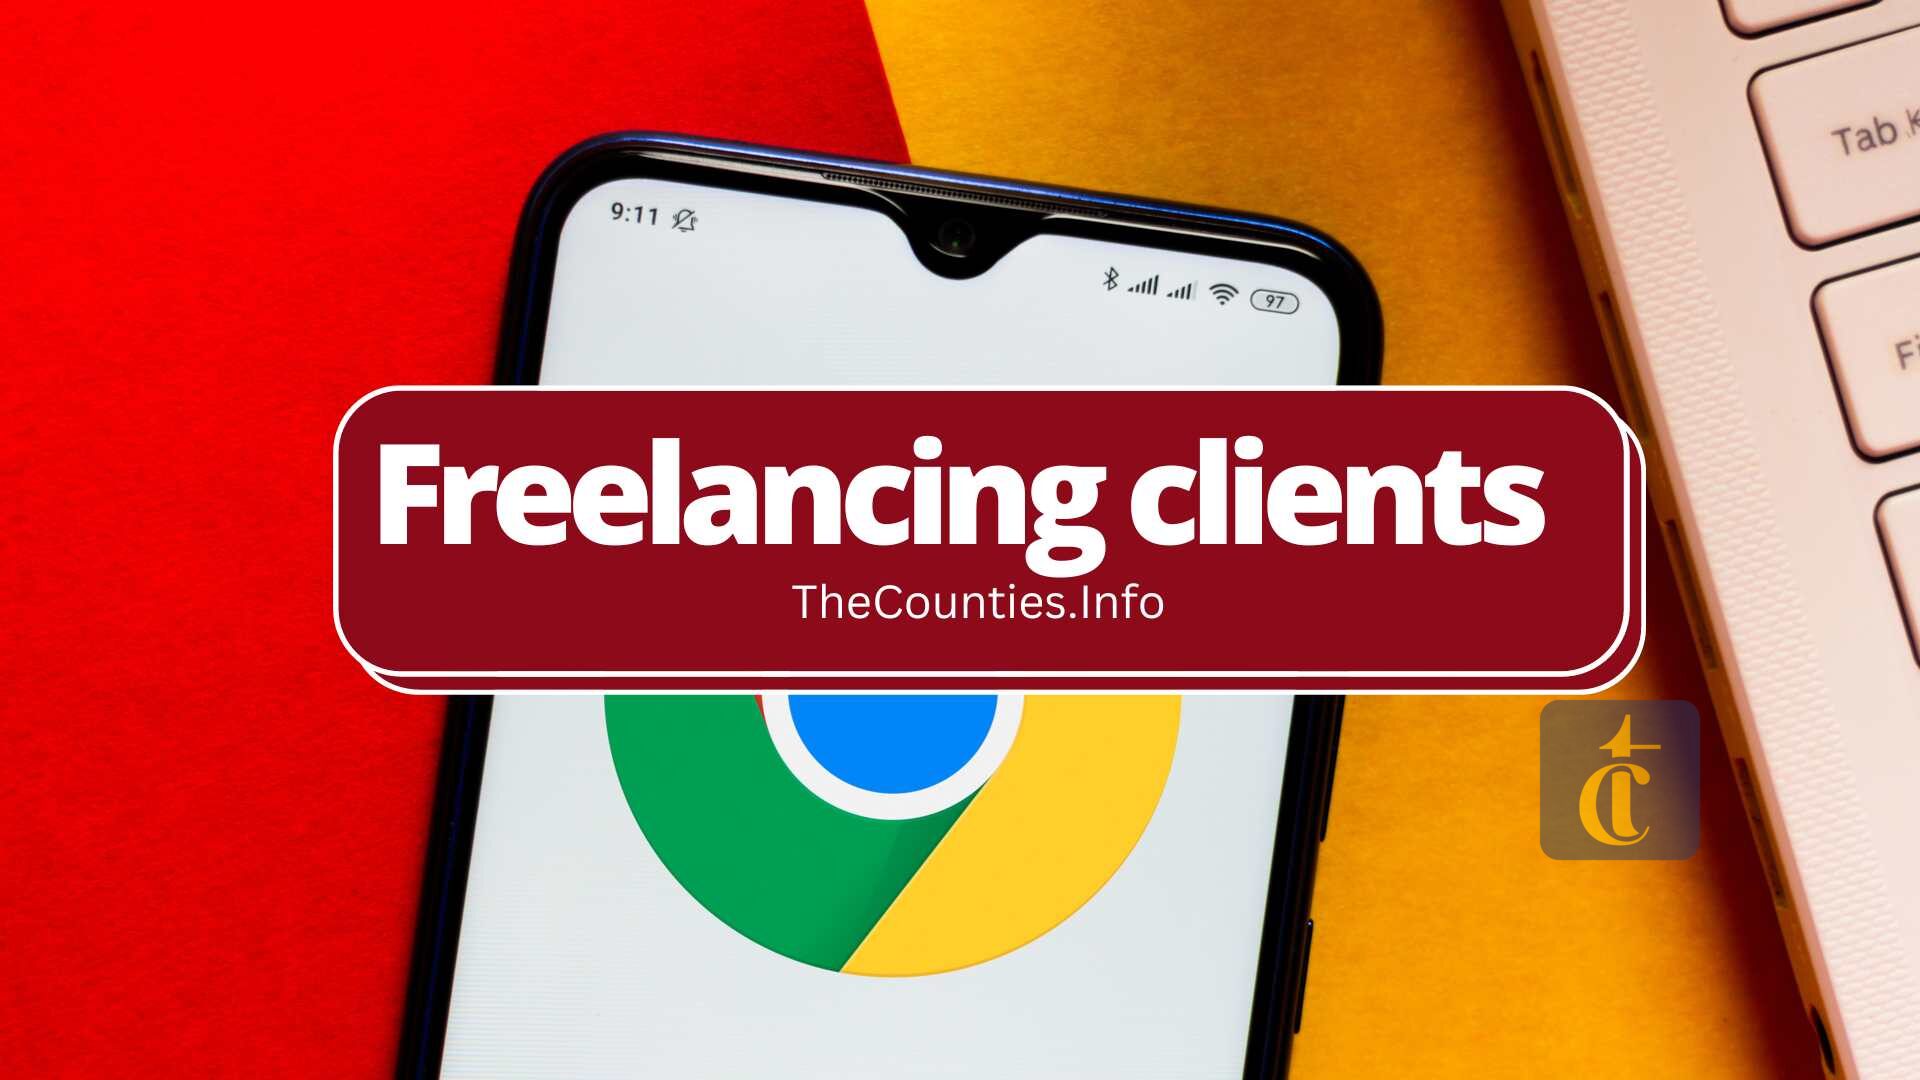 Freelancing clients